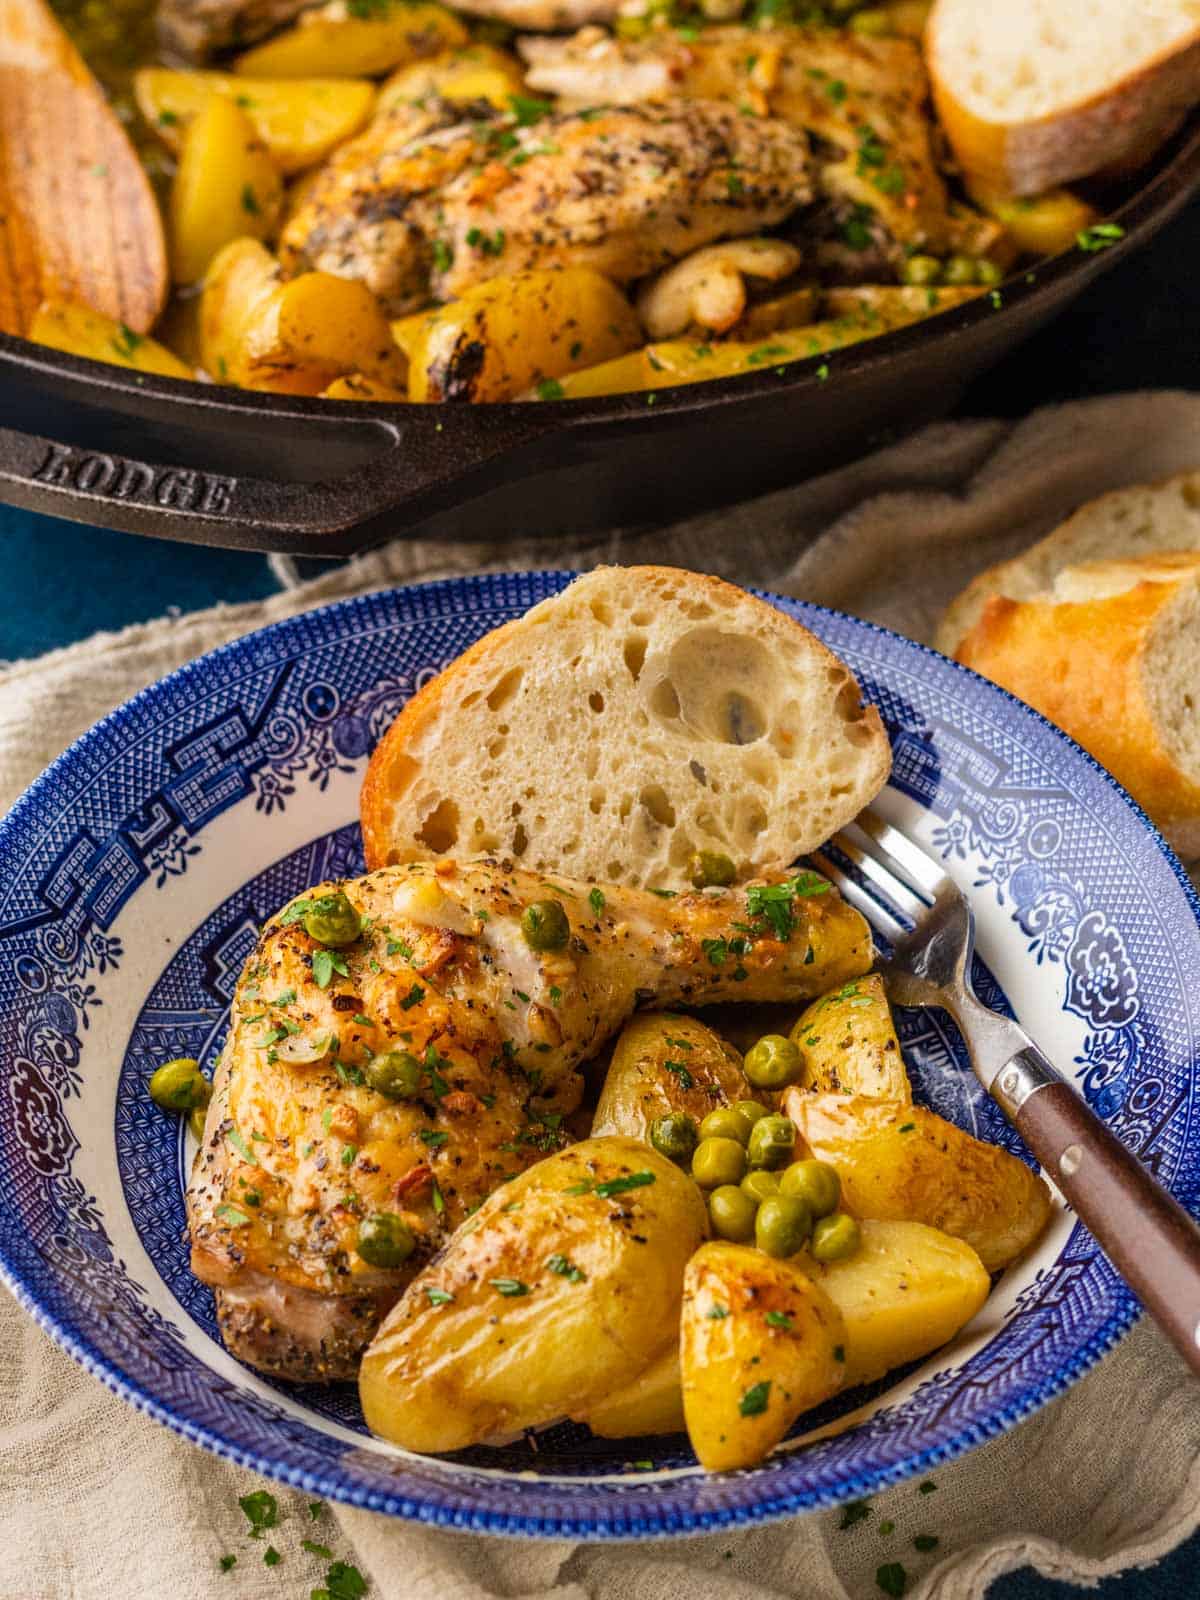 roasted chicken and potatoes with peas in a blue and white bowl with sliced bread.